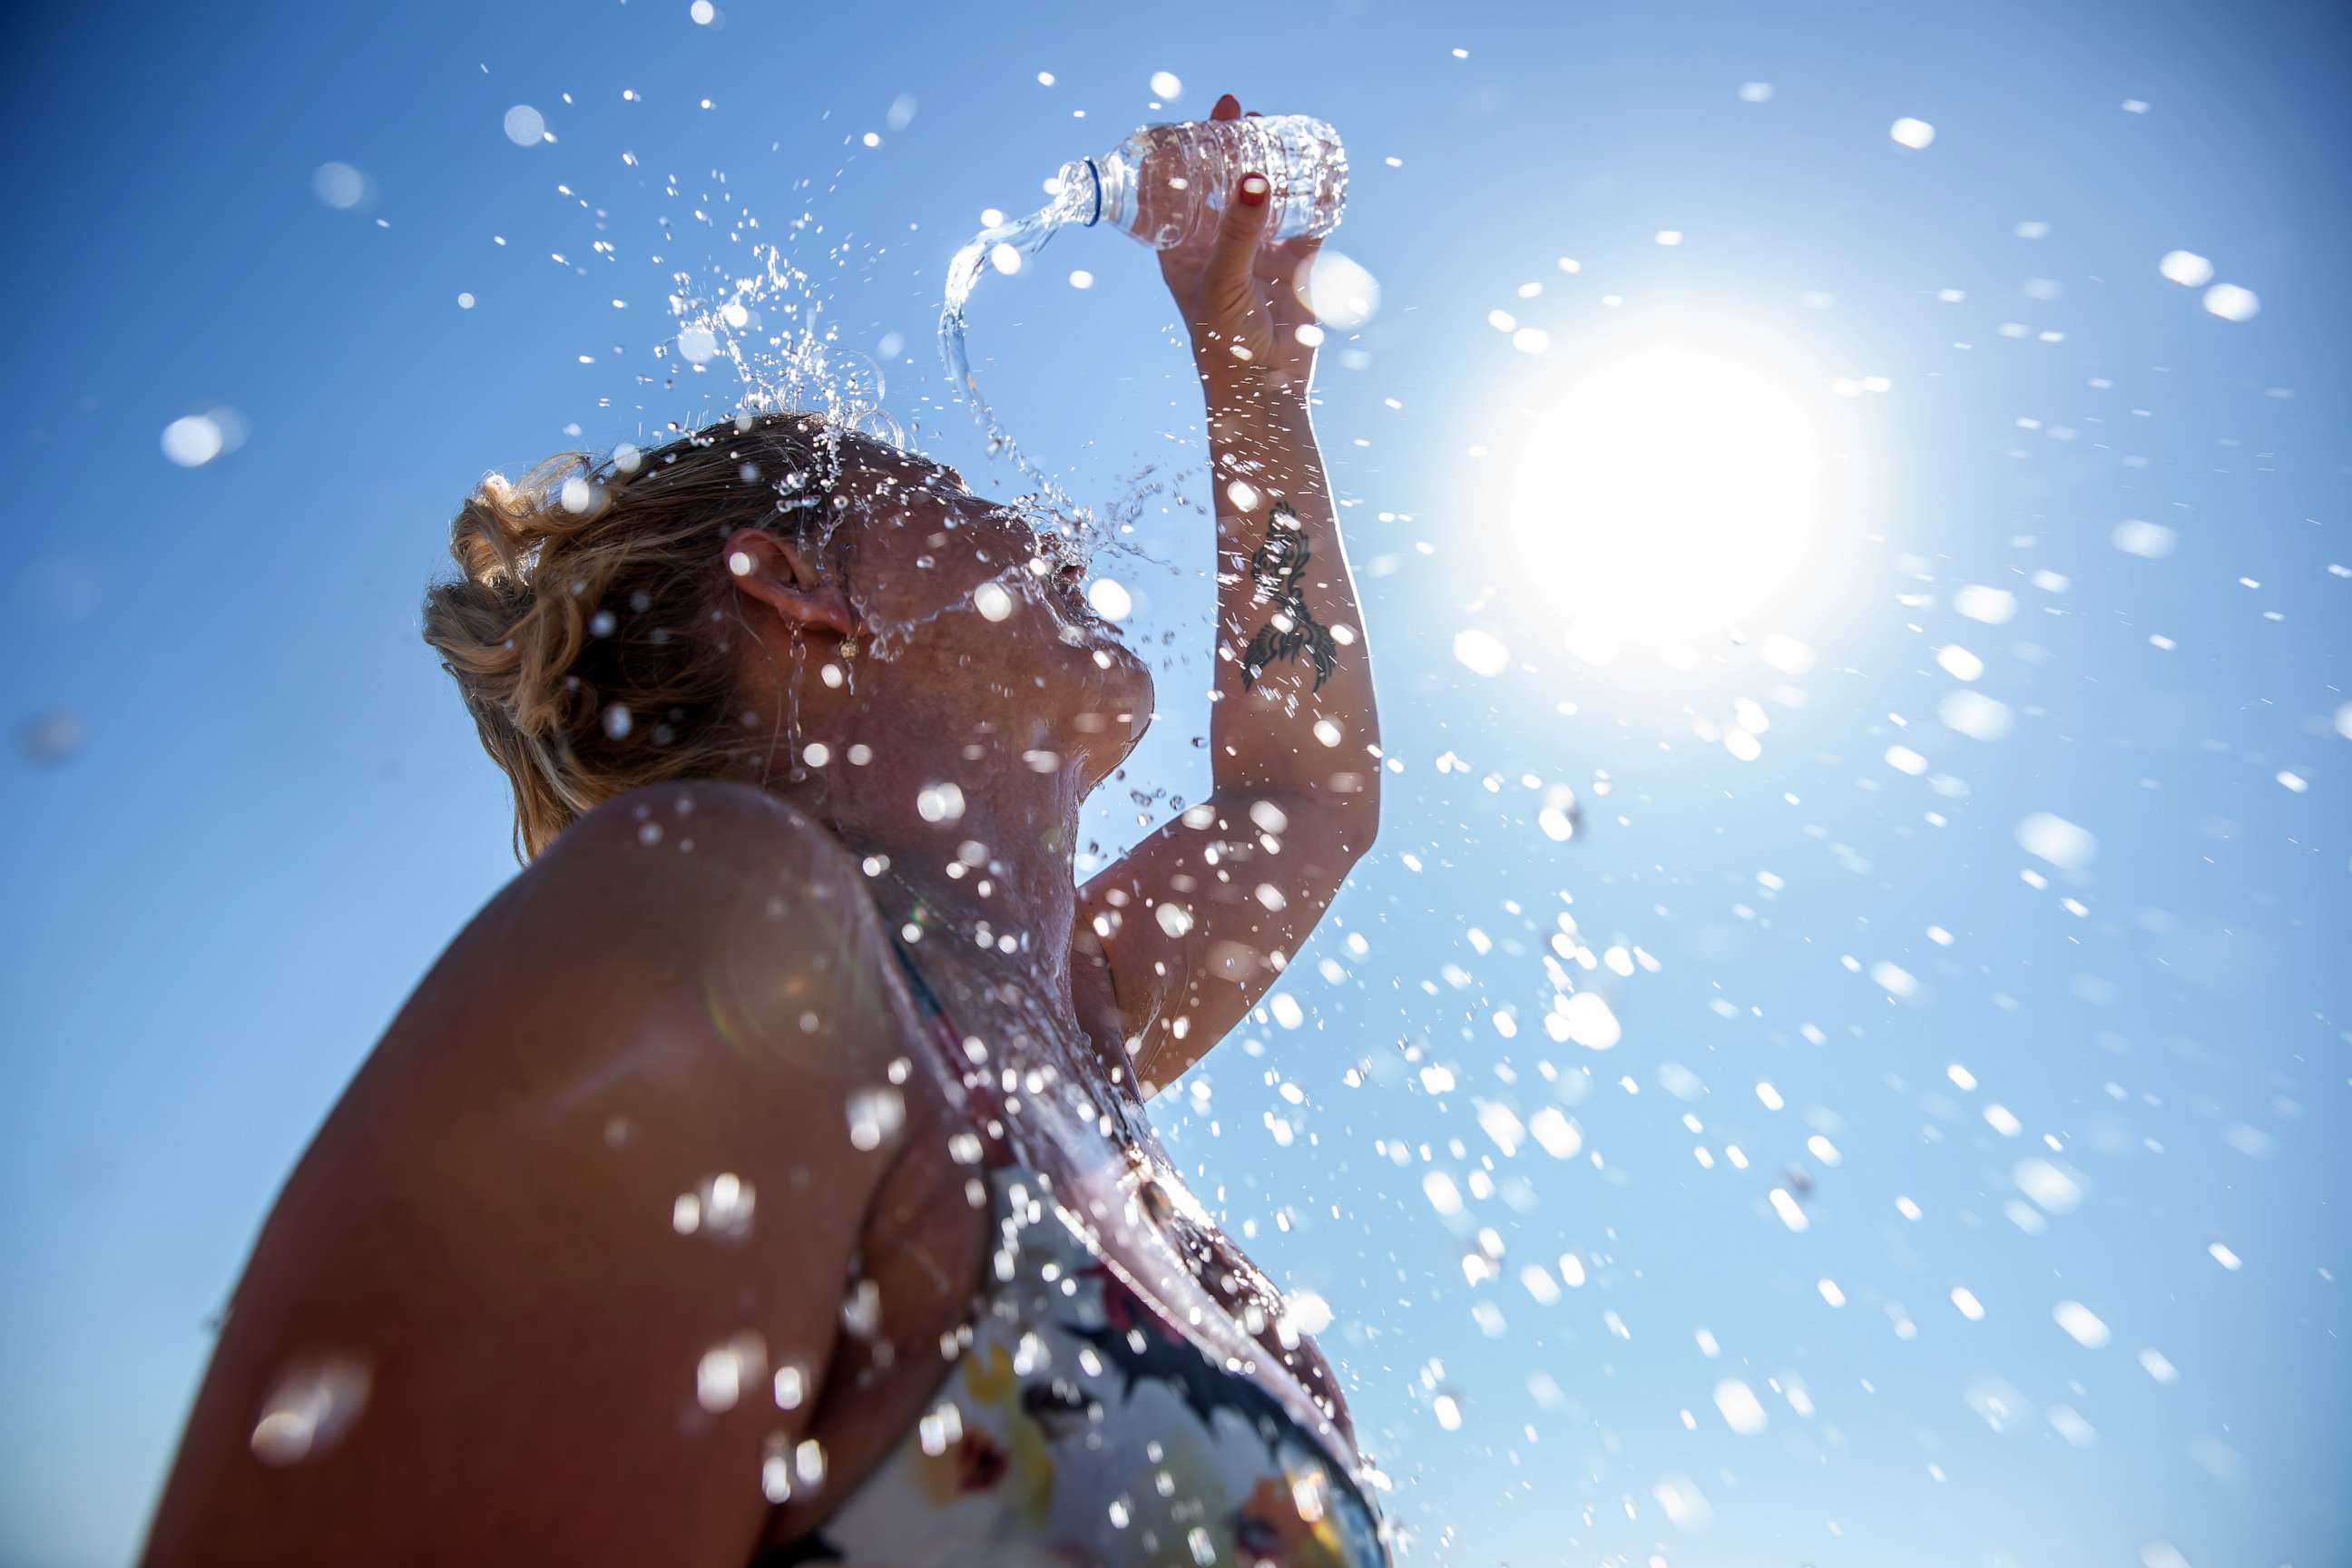 PHOTO: Stock photo of a woman cooling off with water.